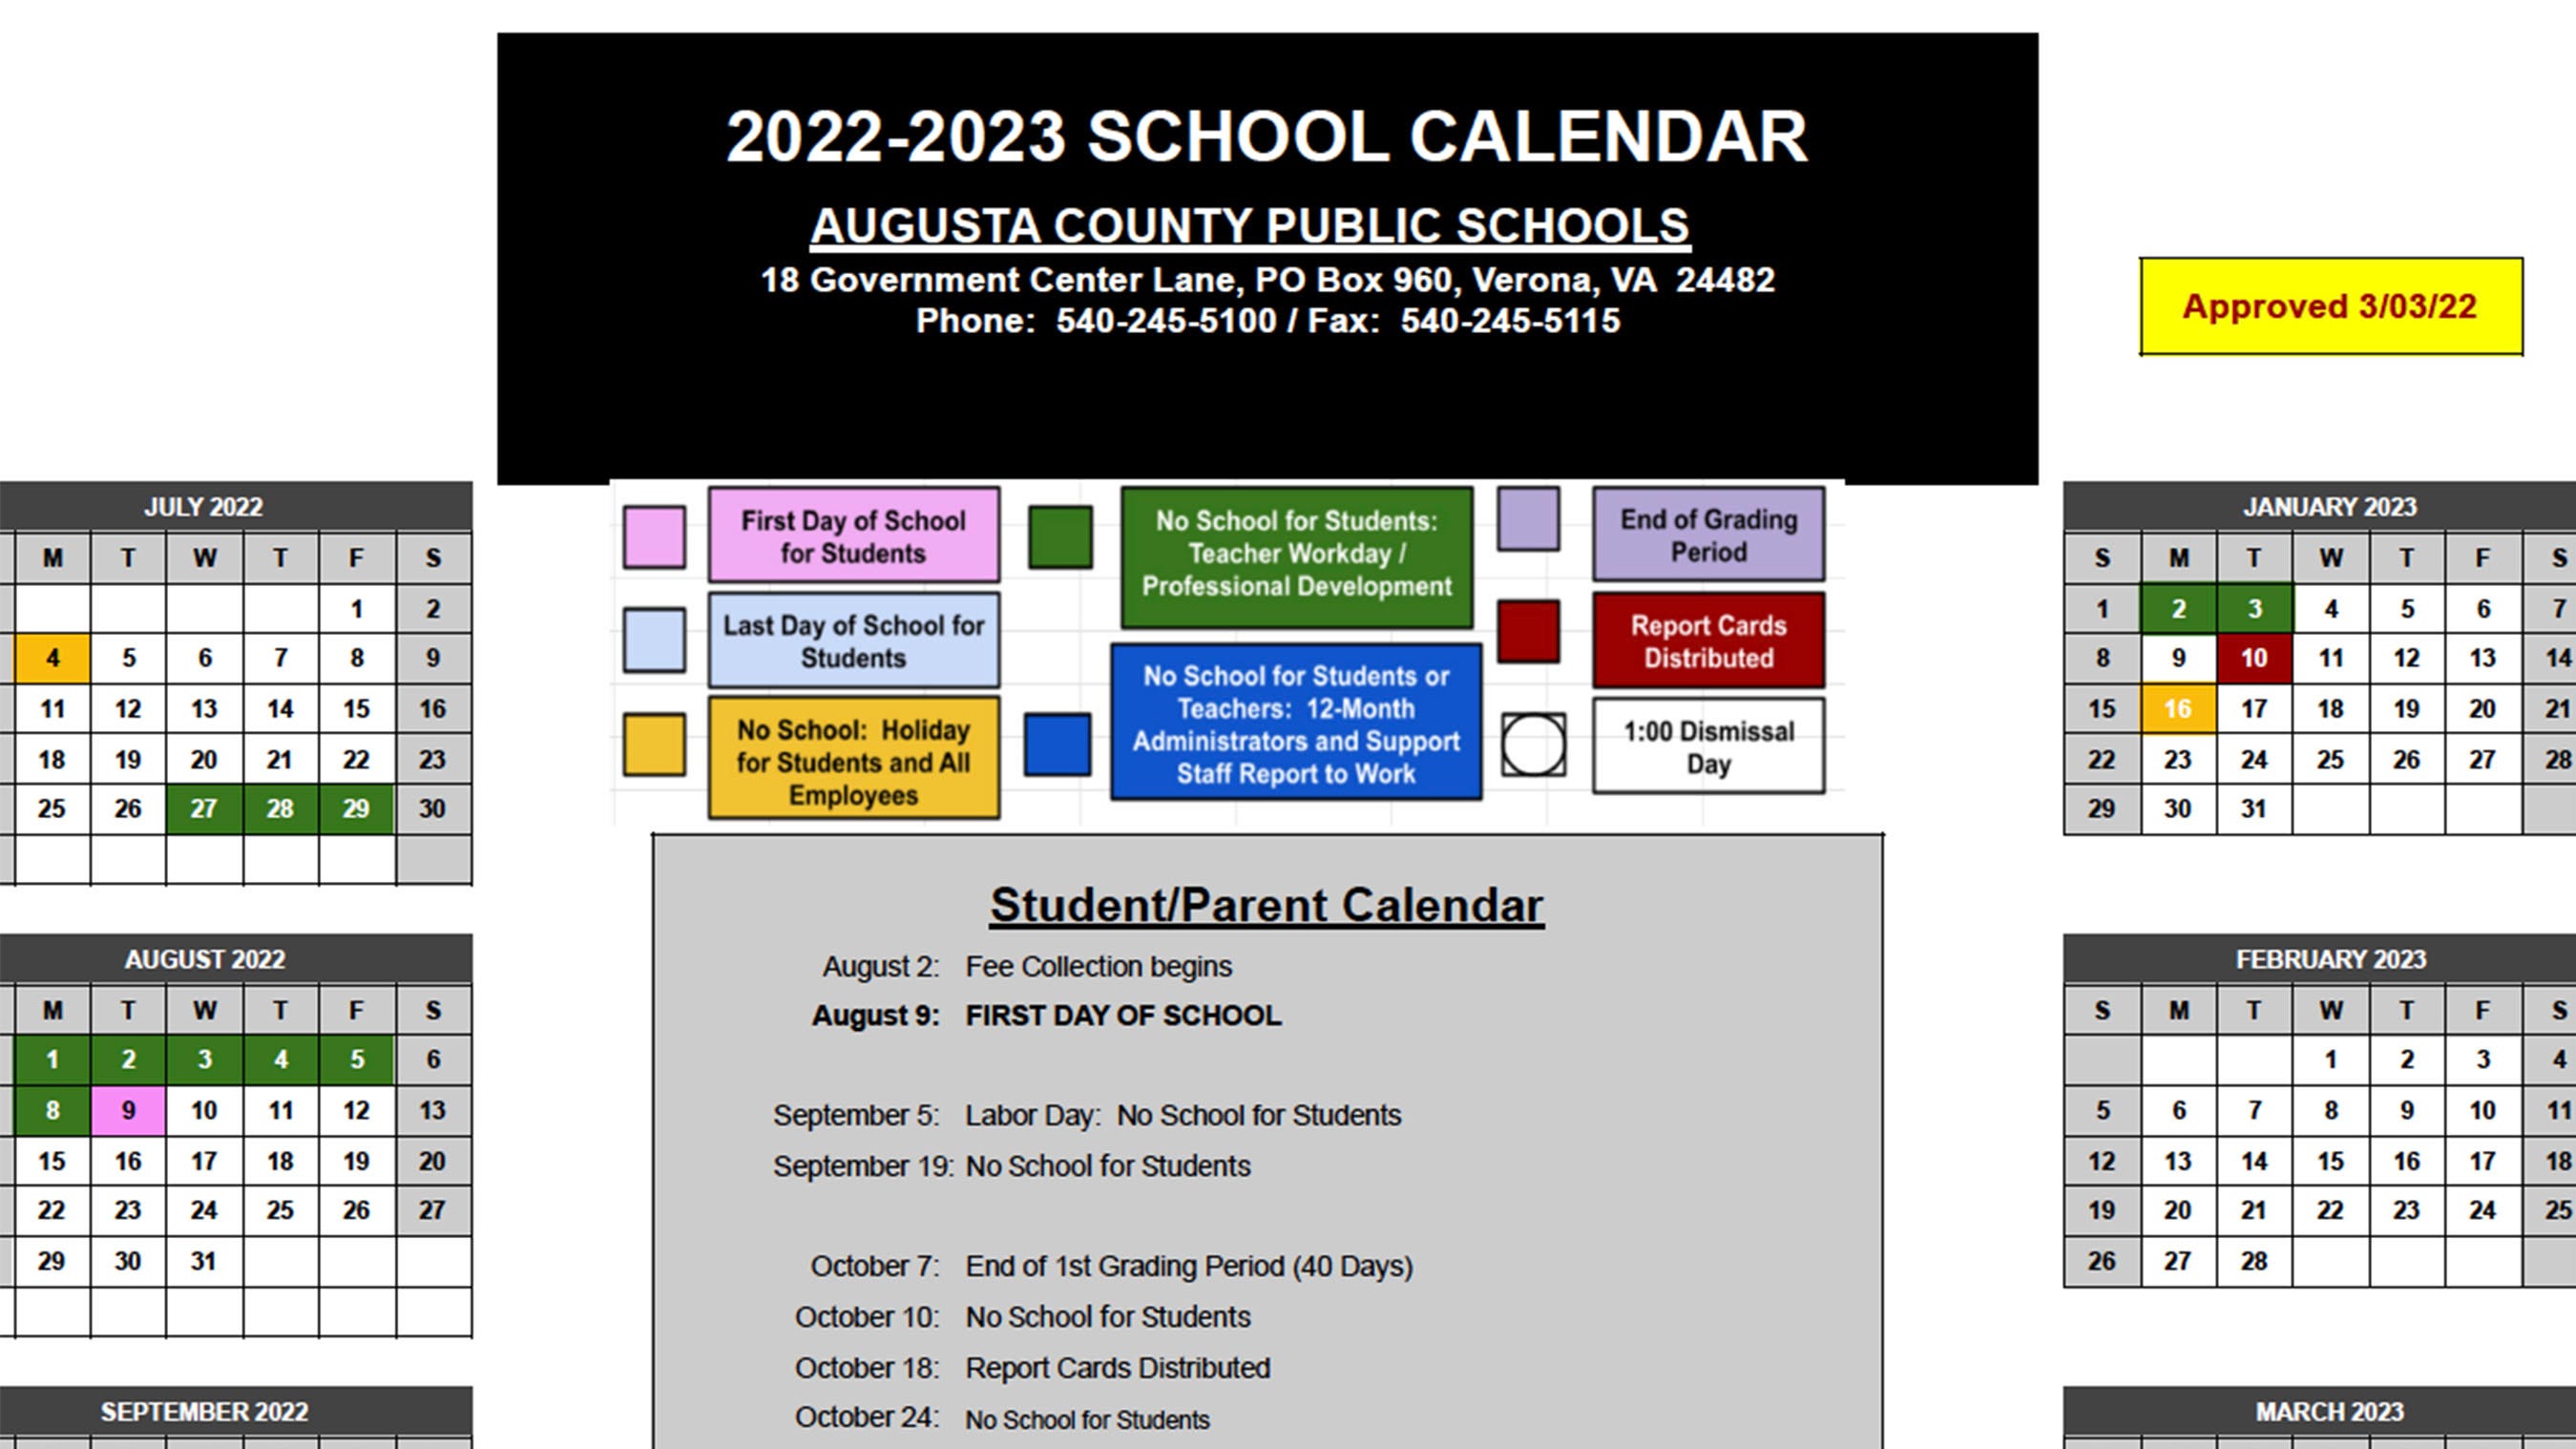 augusta-county-approves-school-calendar-for-2022-2023-academic-year